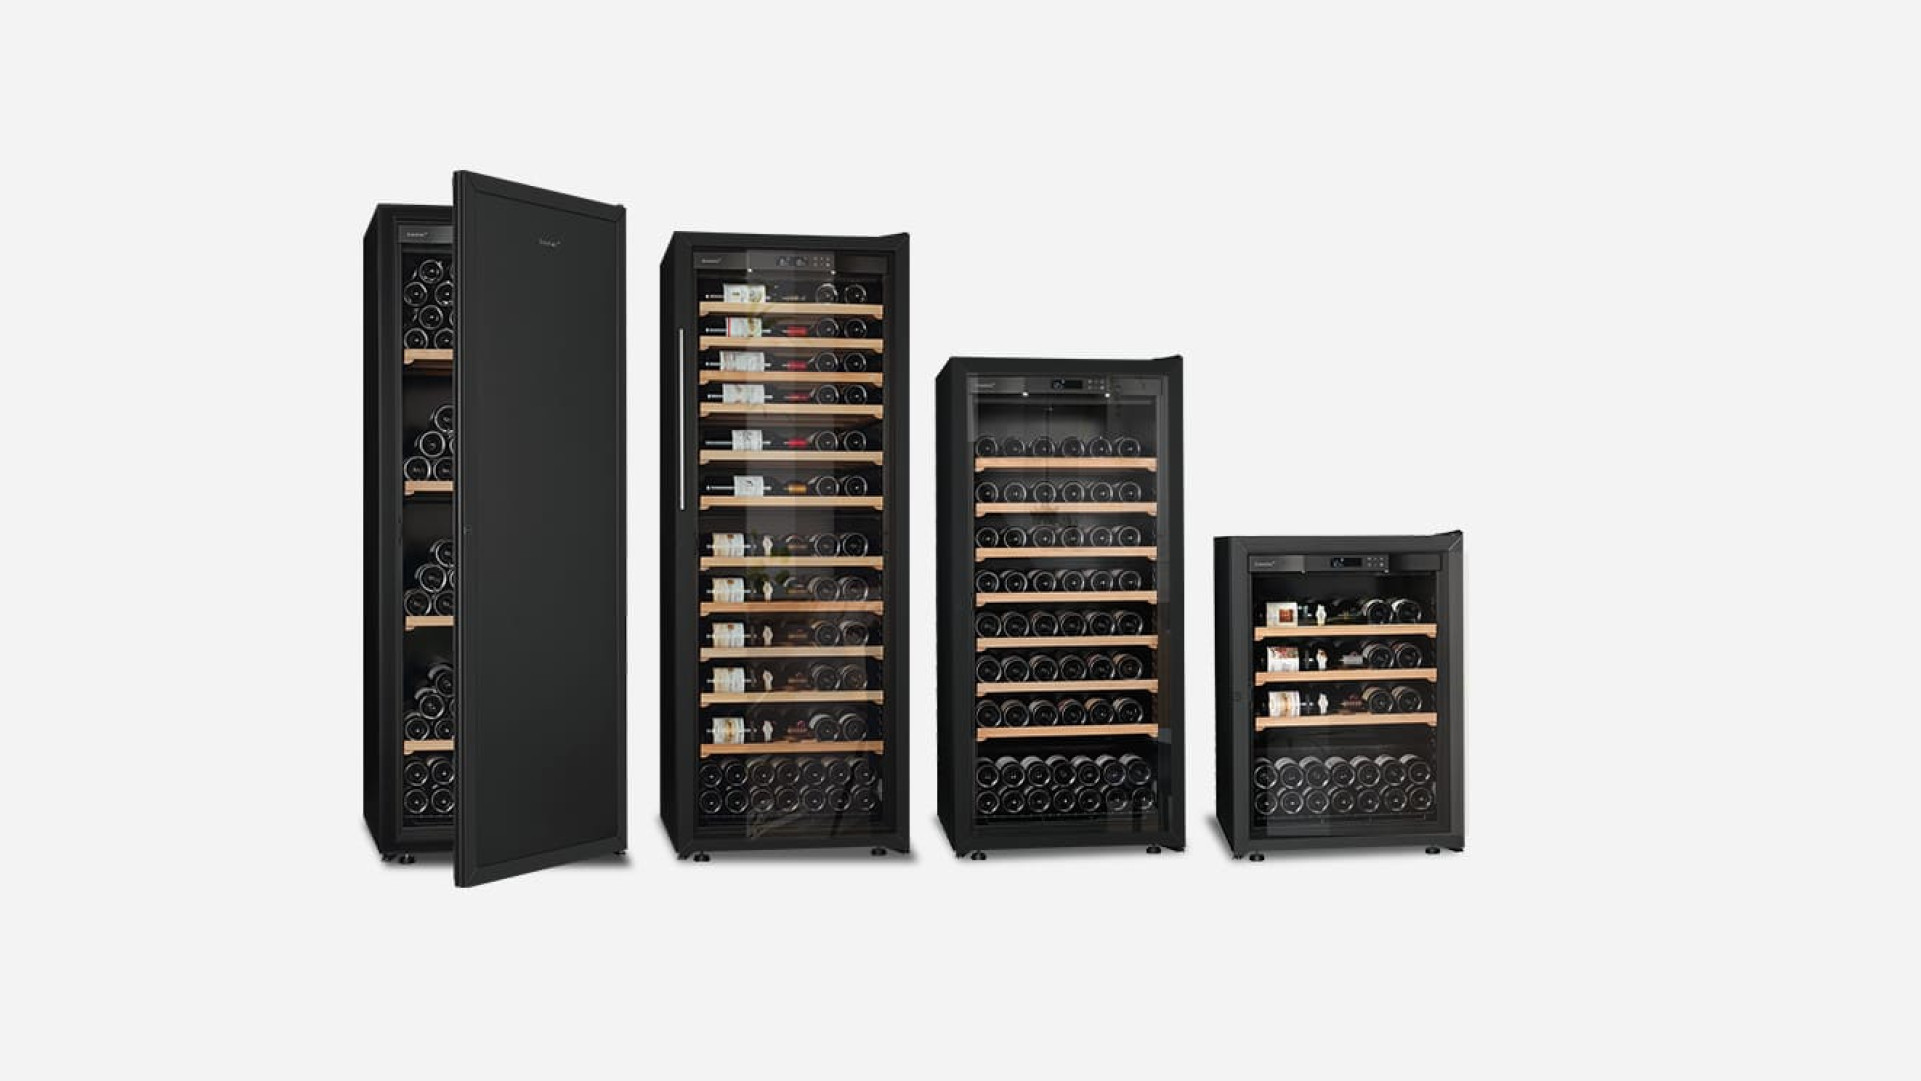 When purchasing the wine cooler, you will have the choice between 2 functions, 4 doors and 3 sizes - La Première EuroCave range